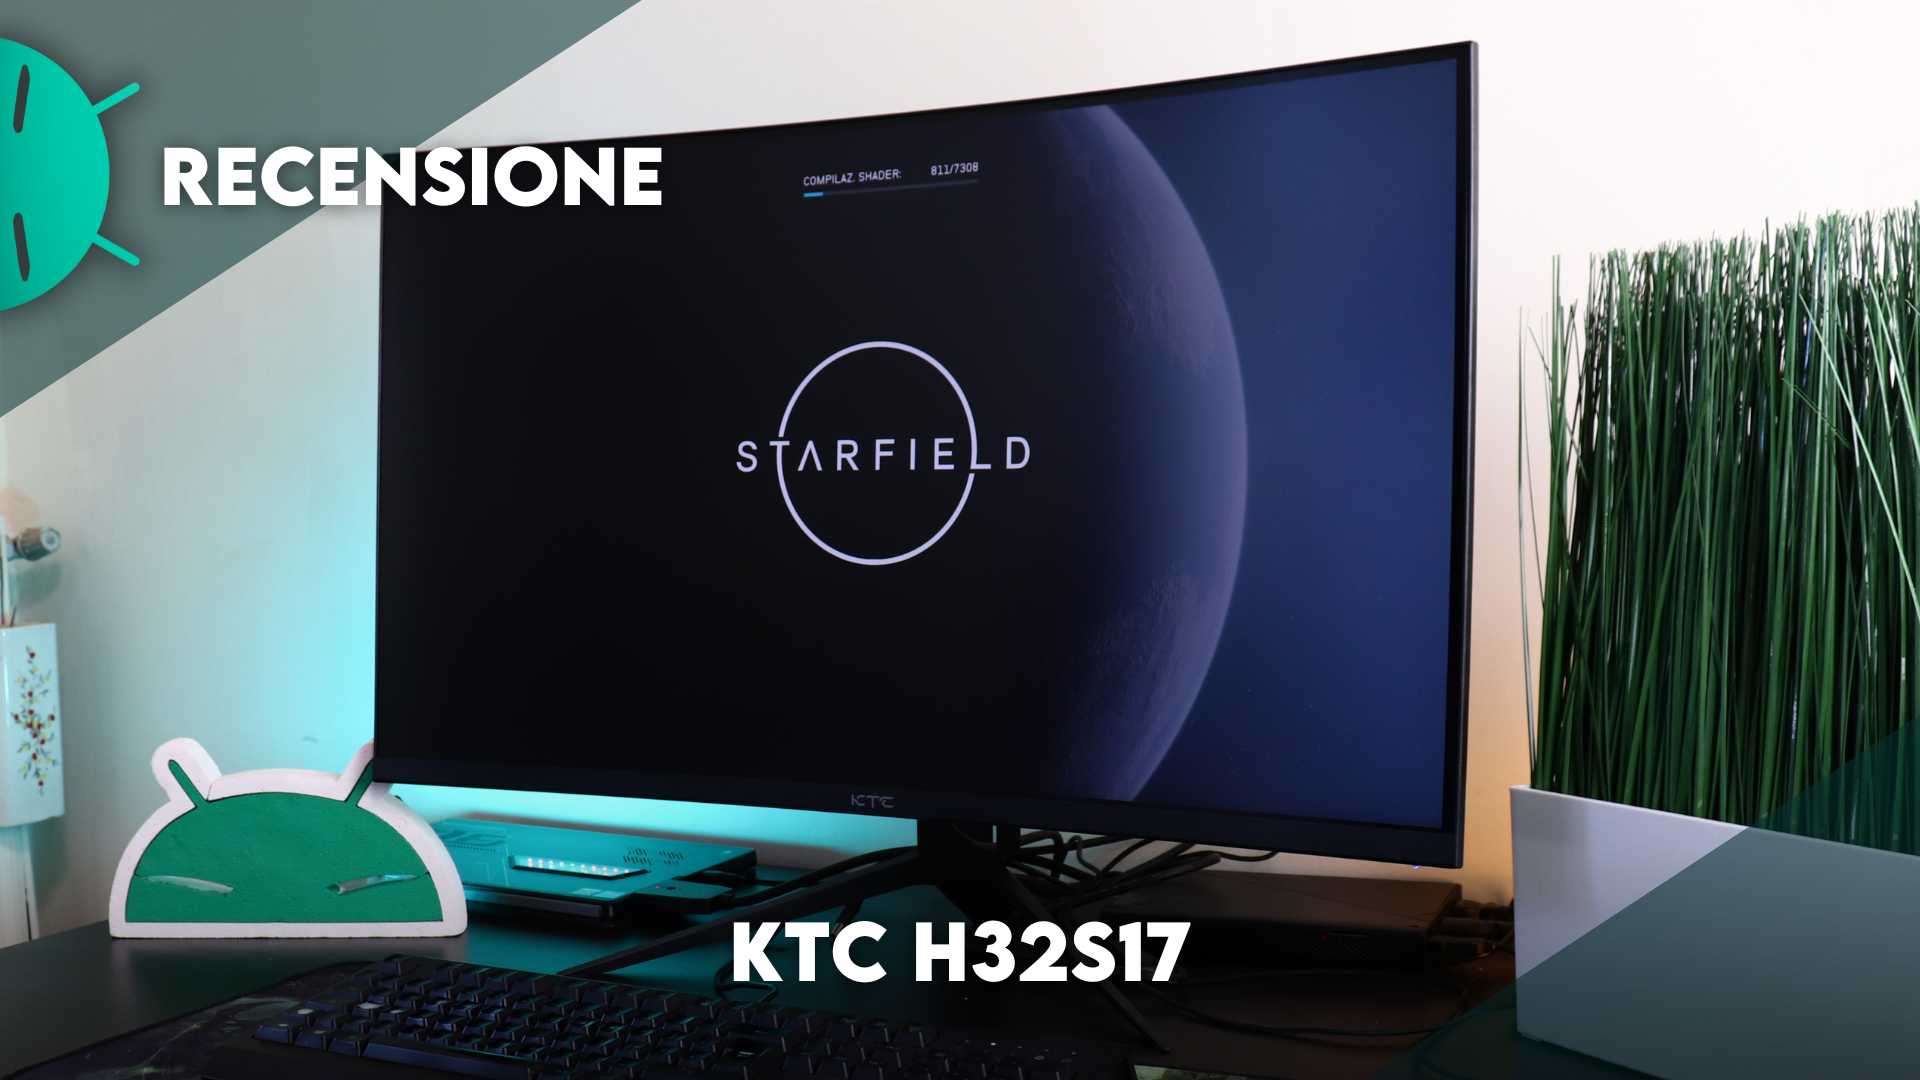 AS A RESULT OF 11.11, THE PRICES OF KTC MONITORS FELL